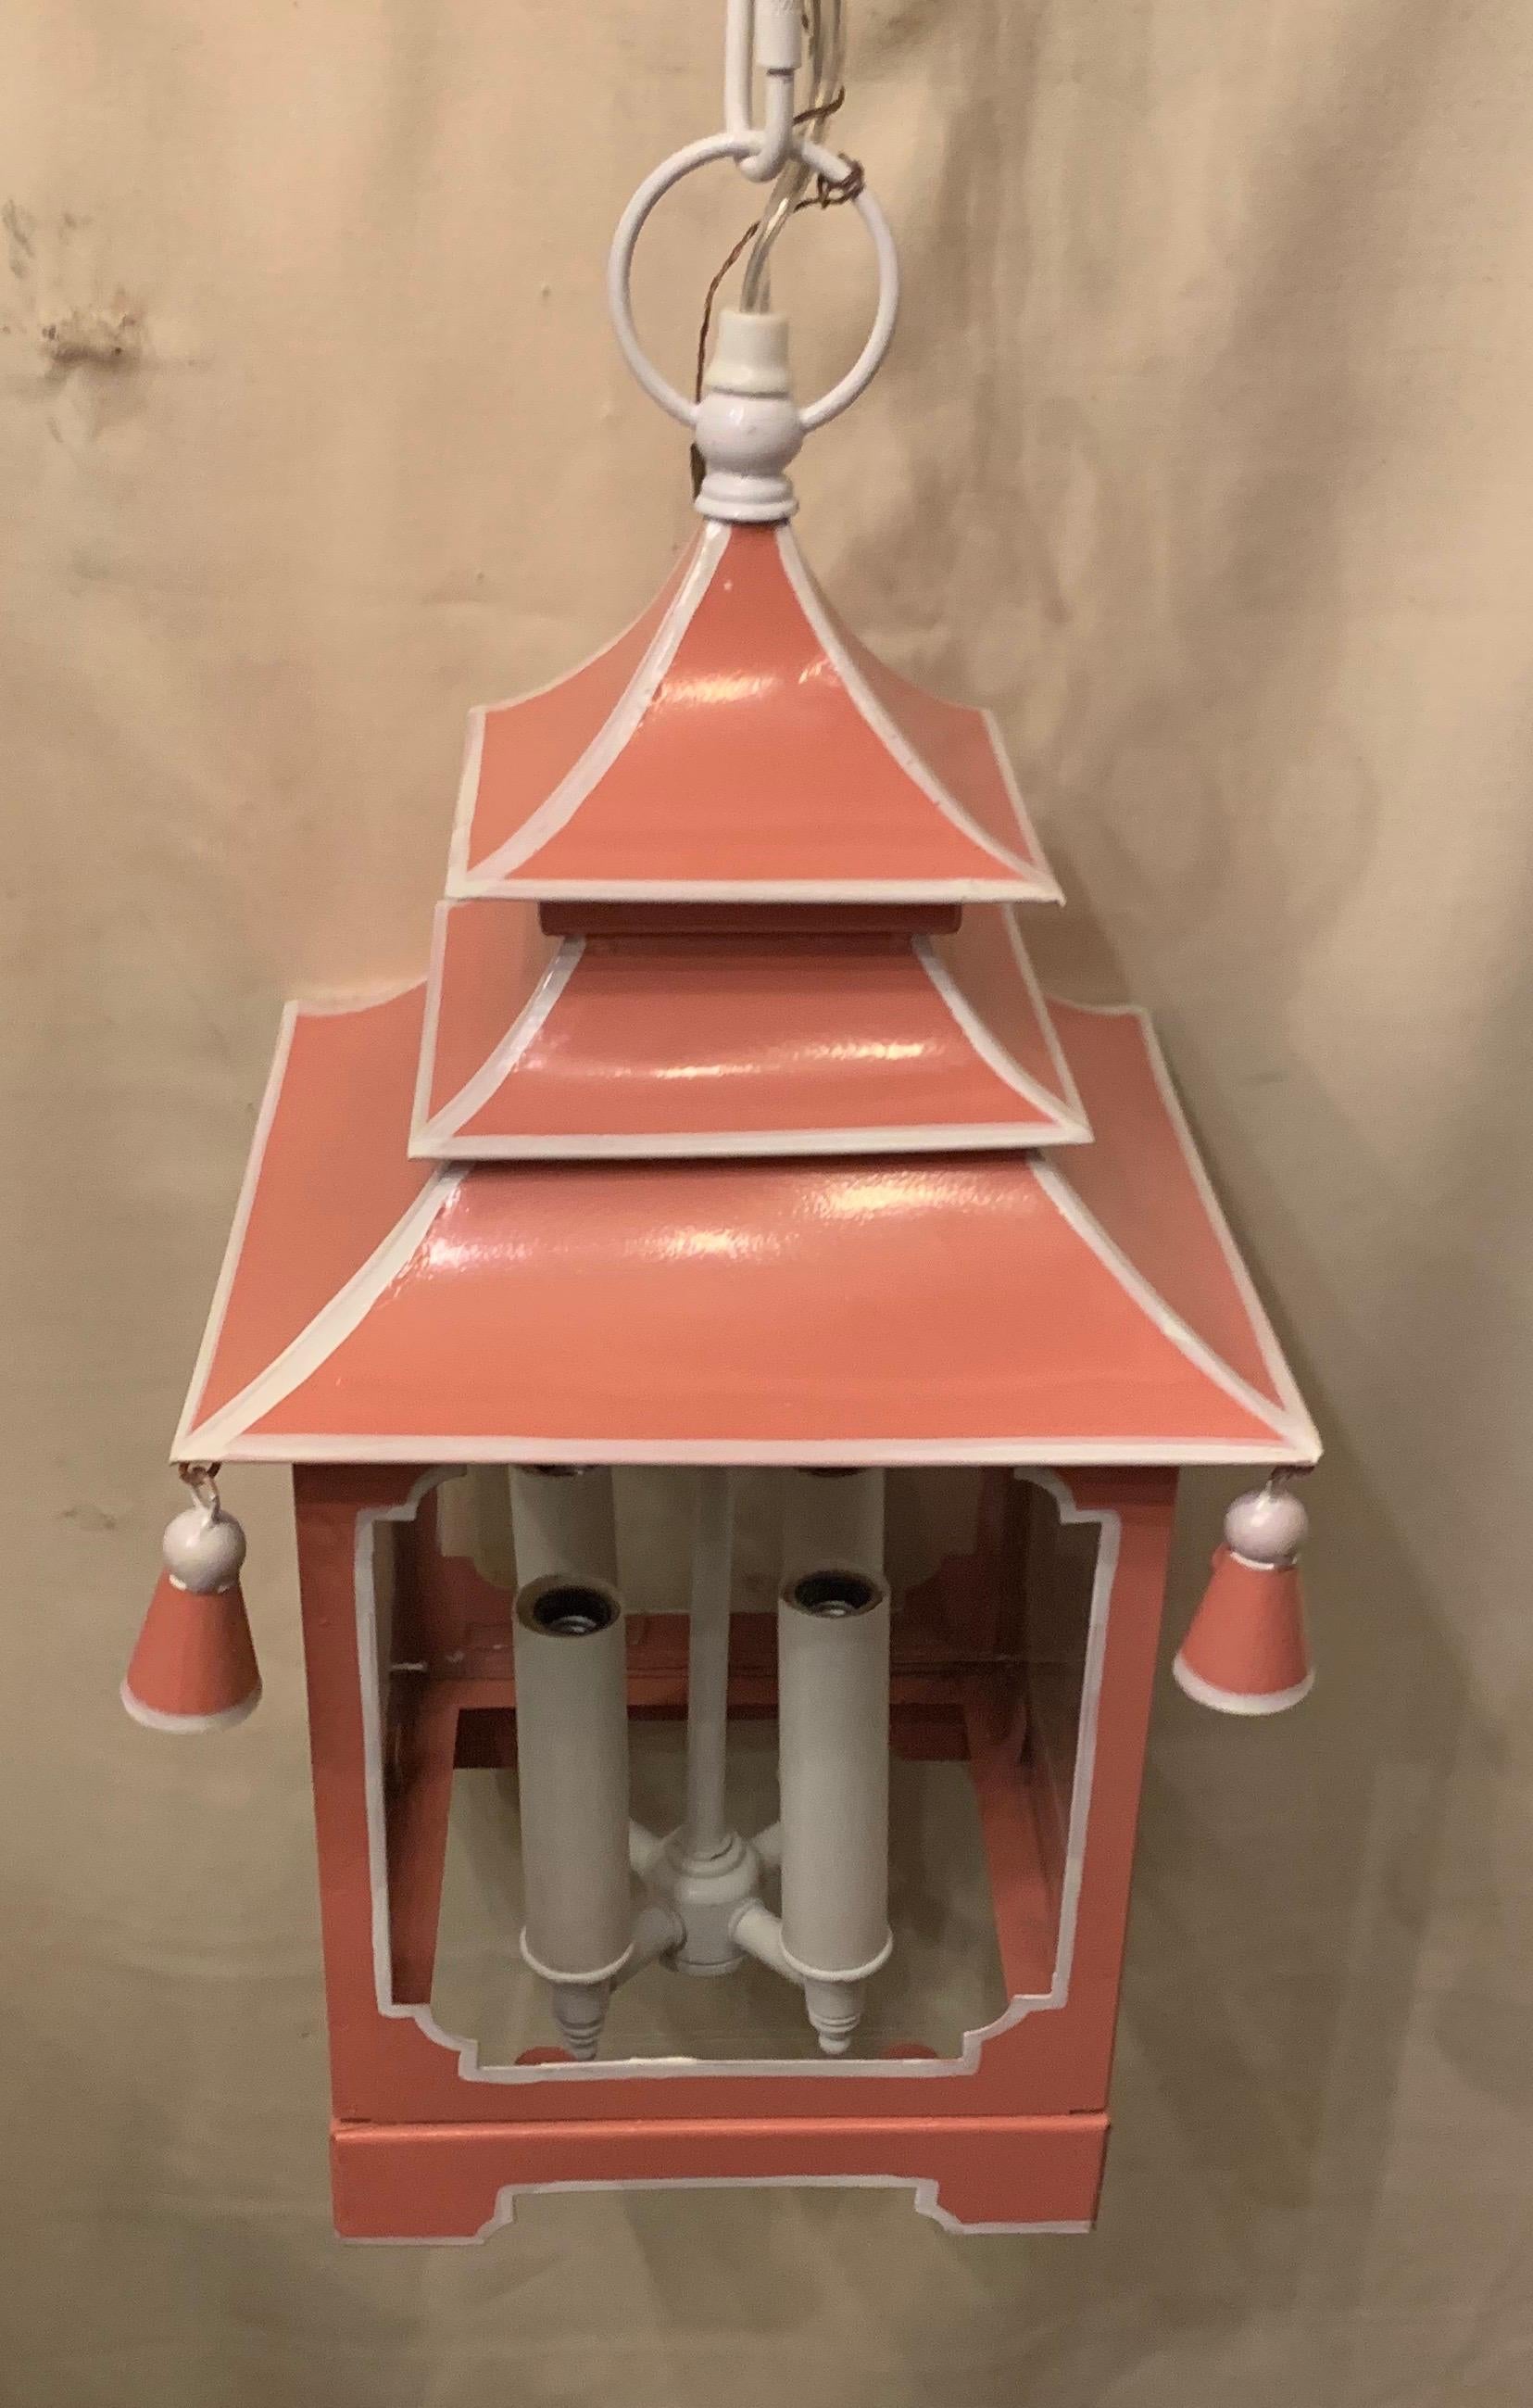 Chinoiserie Pagoda Salmon Pink and White Enameled Glass Lantern Fixture For Sale 3